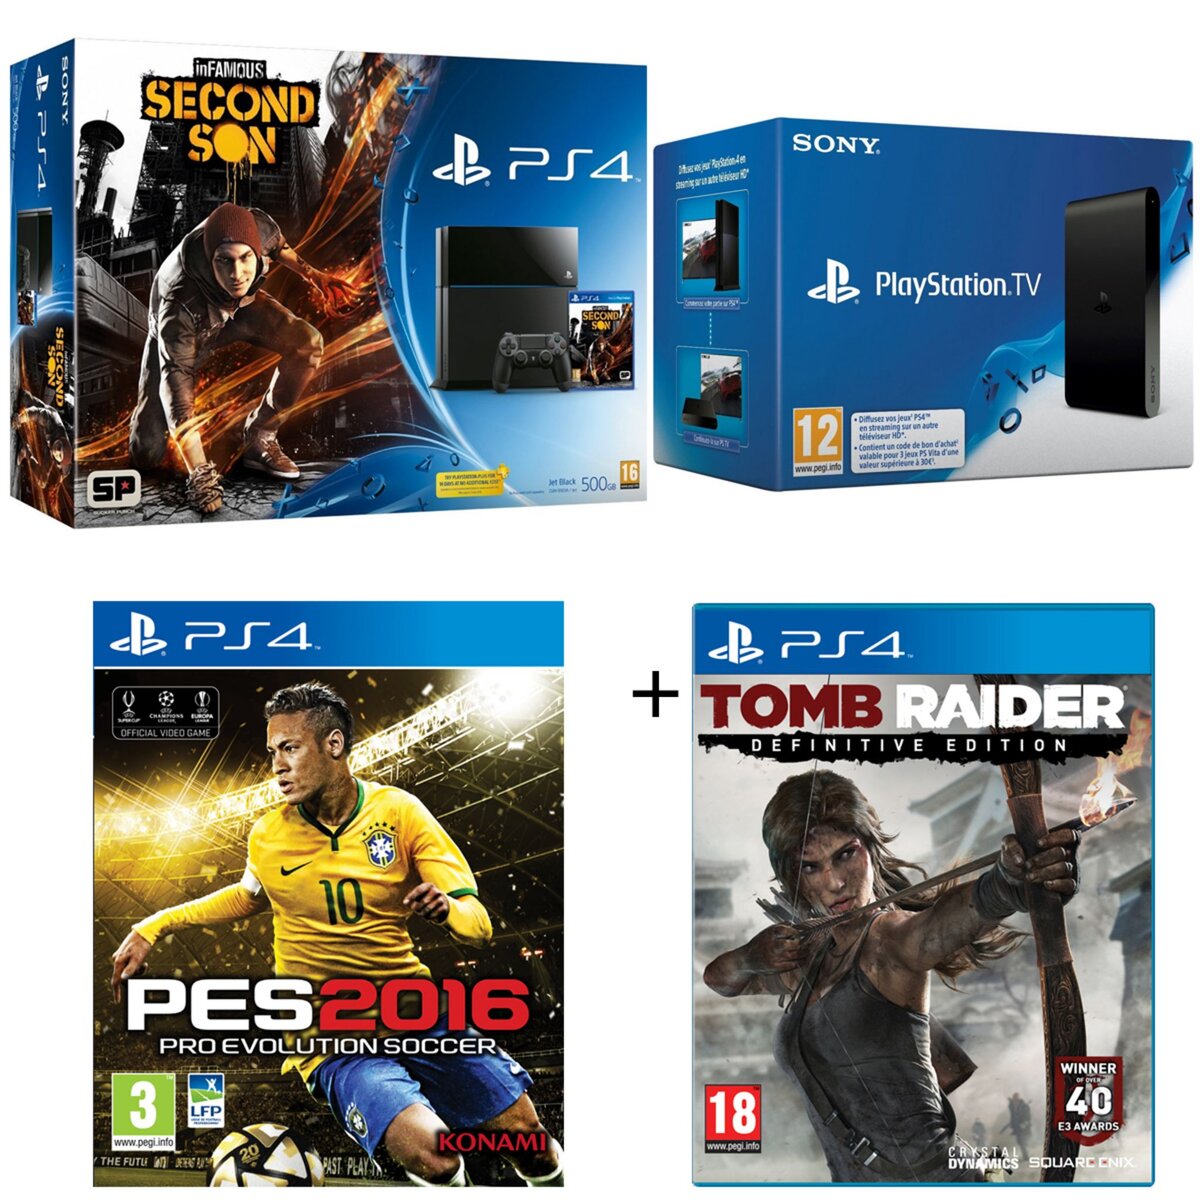 PS4 inFamous 500 Go + Playstation TV  + PES 2016 + Tomb Raider : Definitive Edition